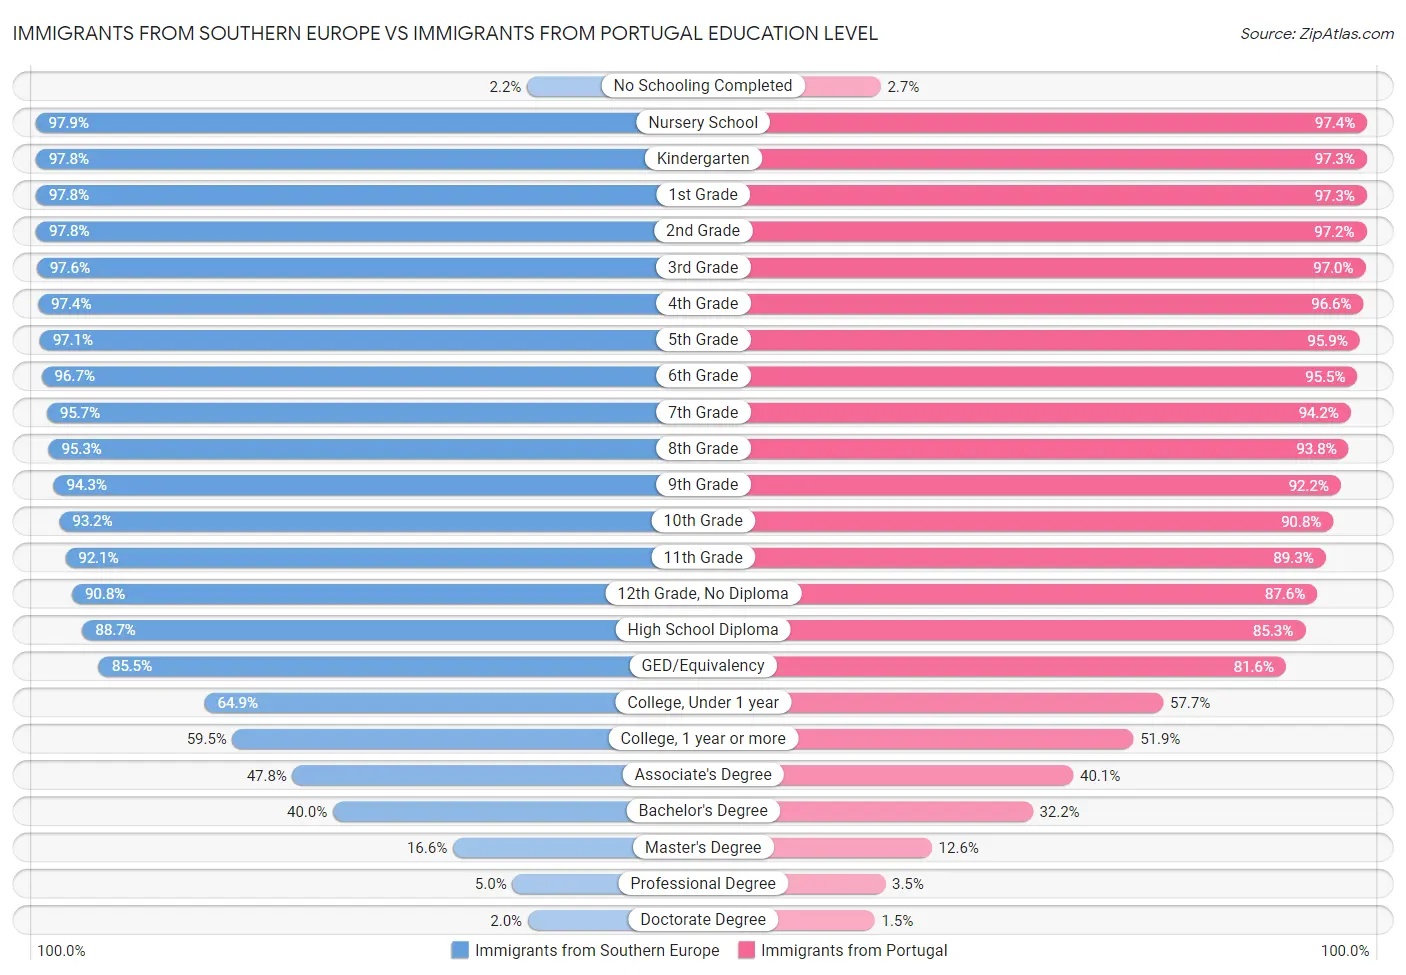 Immigrants from Southern Europe vs Immigrants from Portugal Education Level